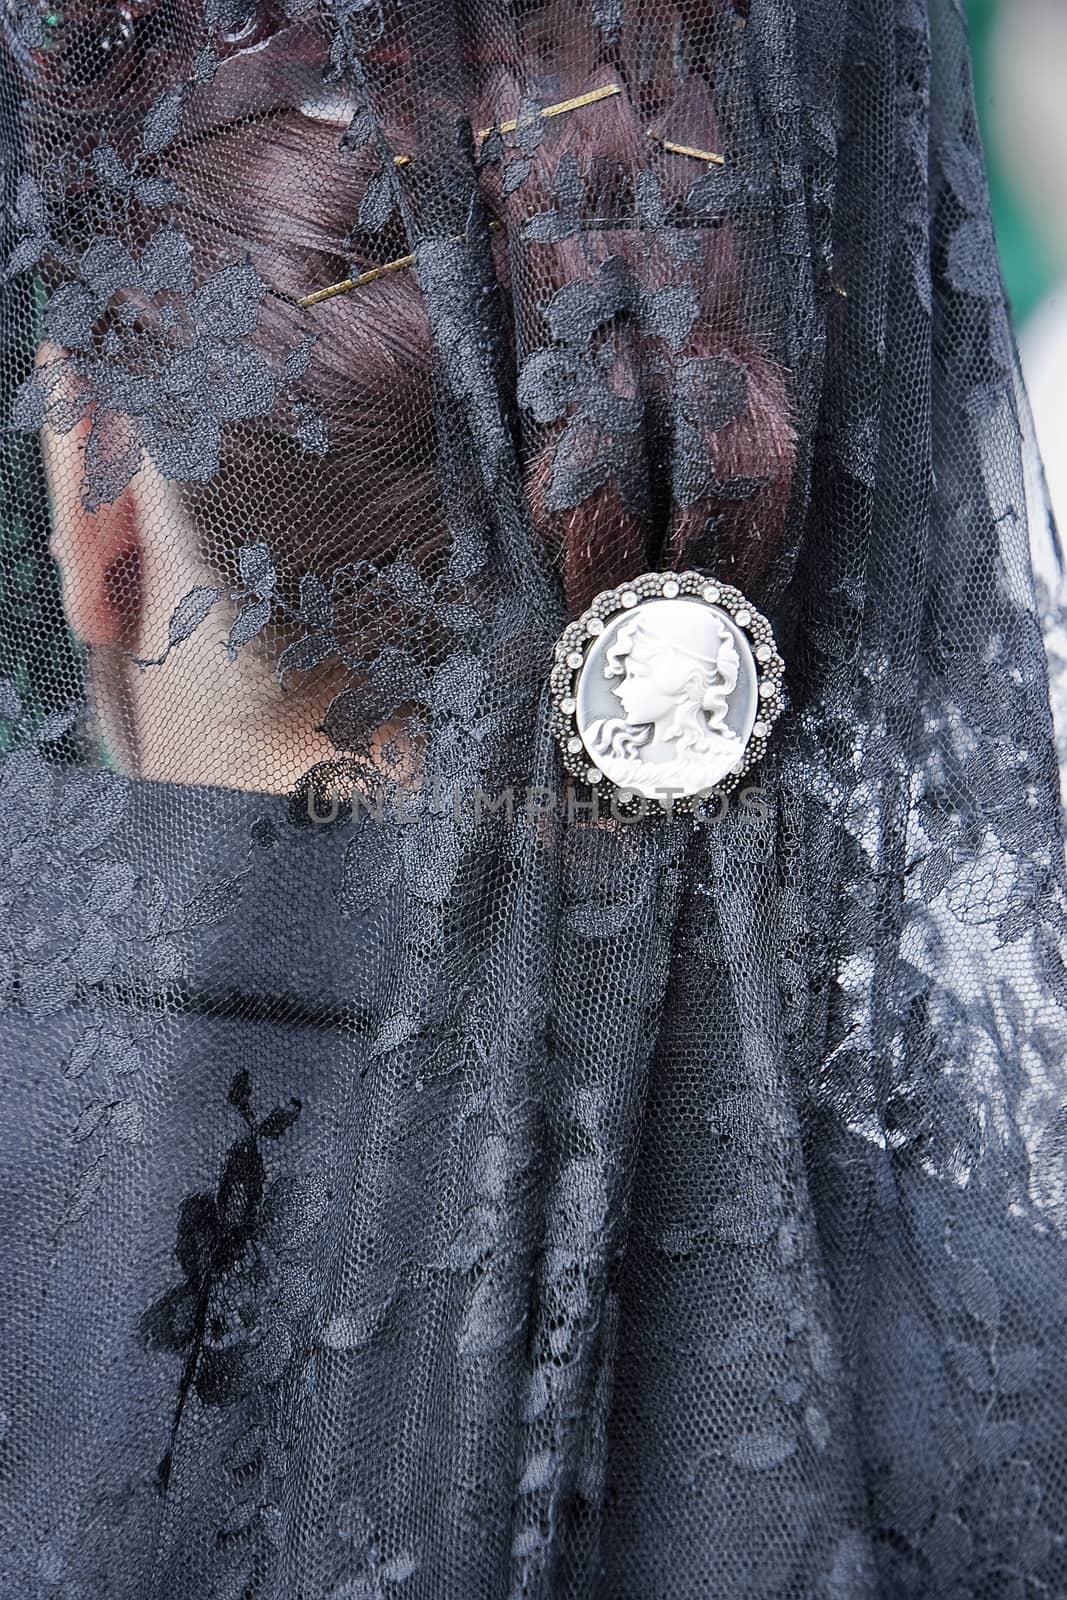 Detail of mantilla and touched embroidered black with silver snap during a procession of holy week, Andalusia, Spain